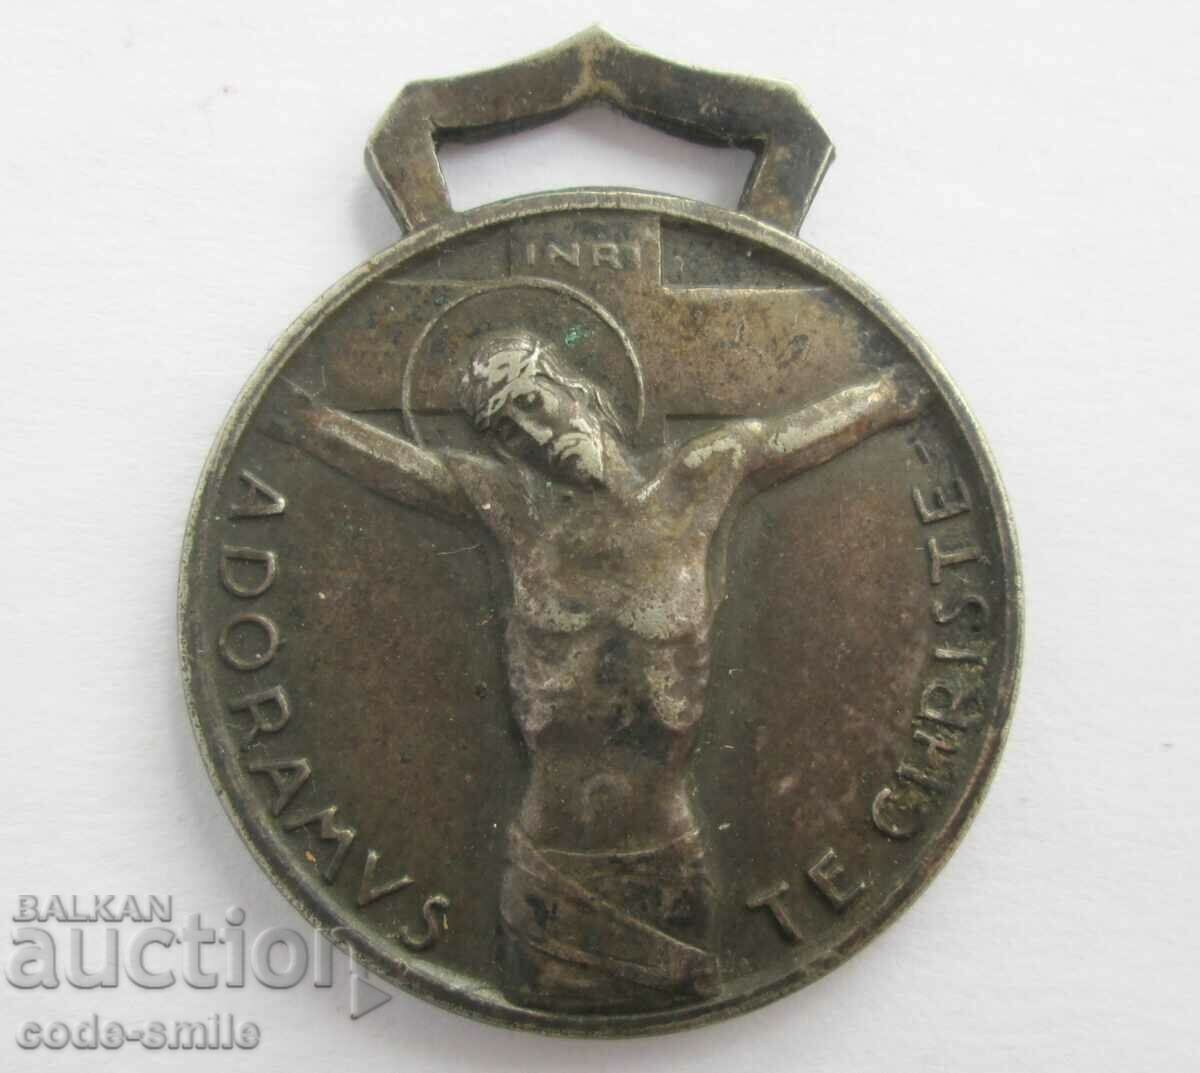 Old Christian Religious Redemption Medal 1933